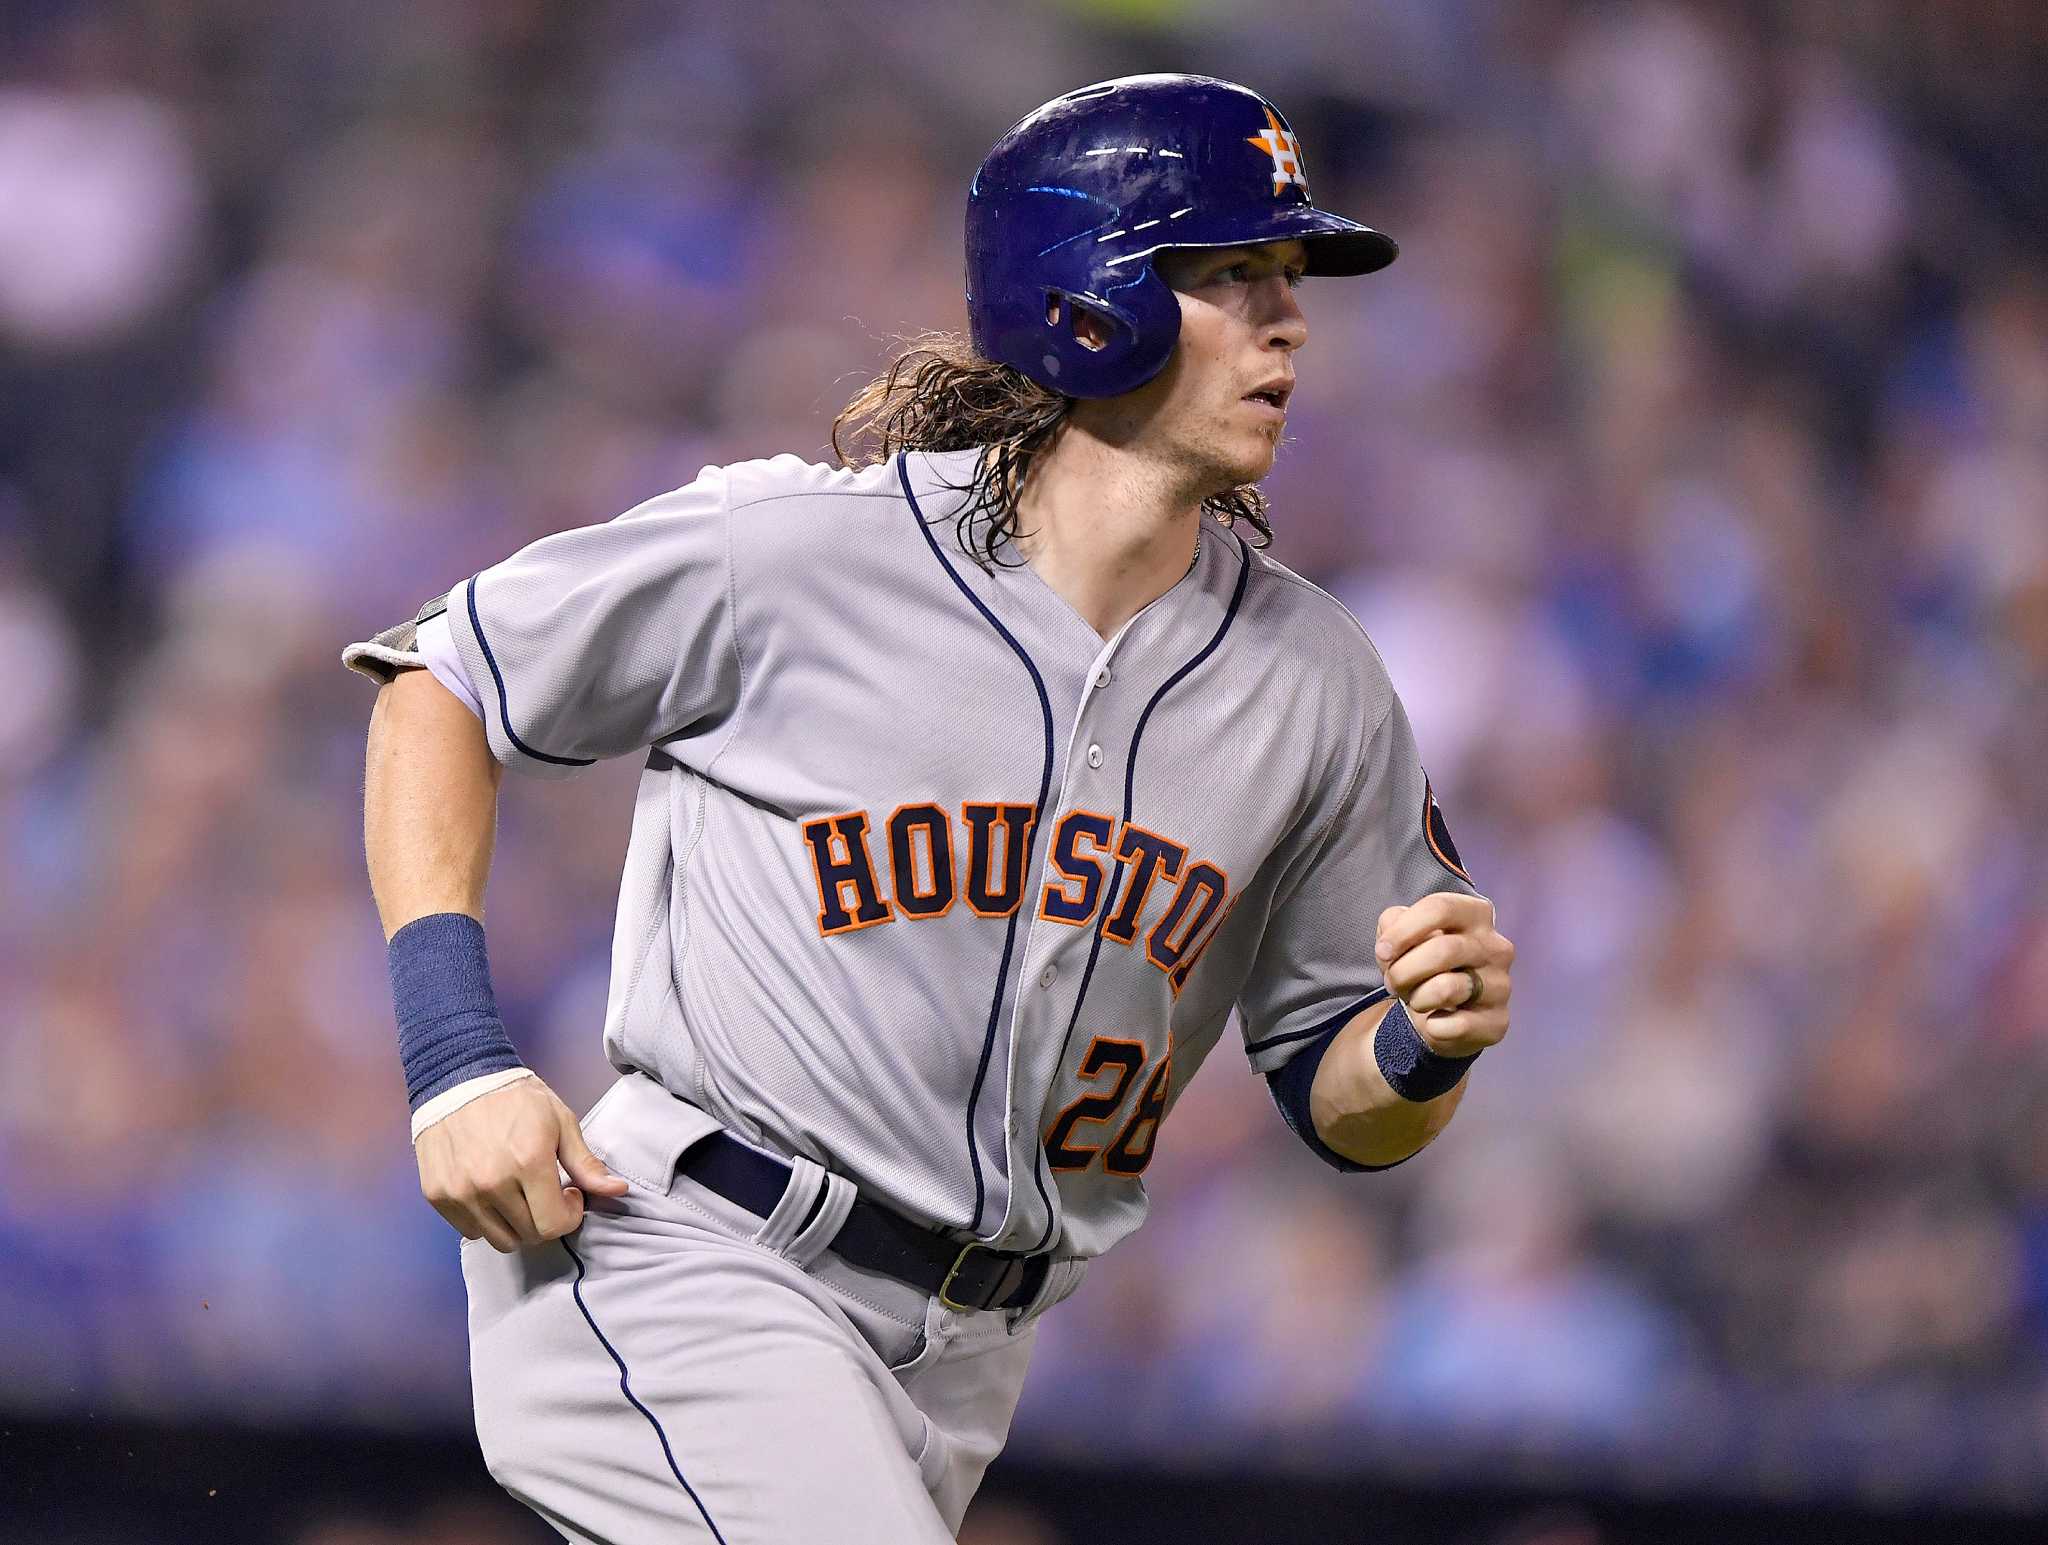 Rays' Colby Rasmus to 'step away' from game; 2017 return doubtful